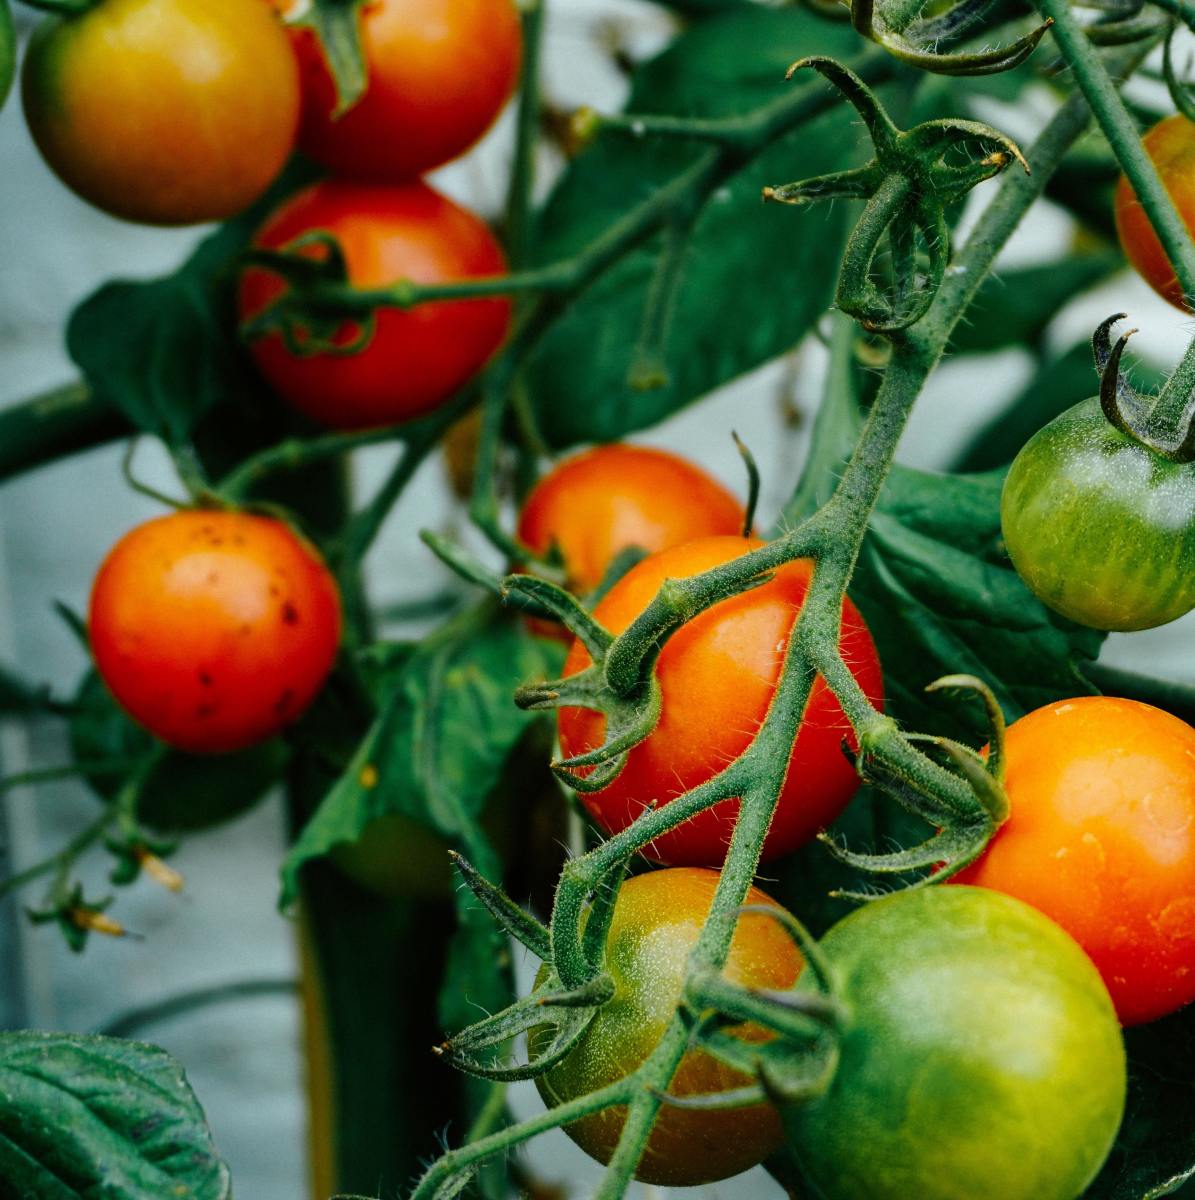 My decades of experience with organic farming have led me to a few simple tips for growing the most flavorful, delicious tomatoes. 